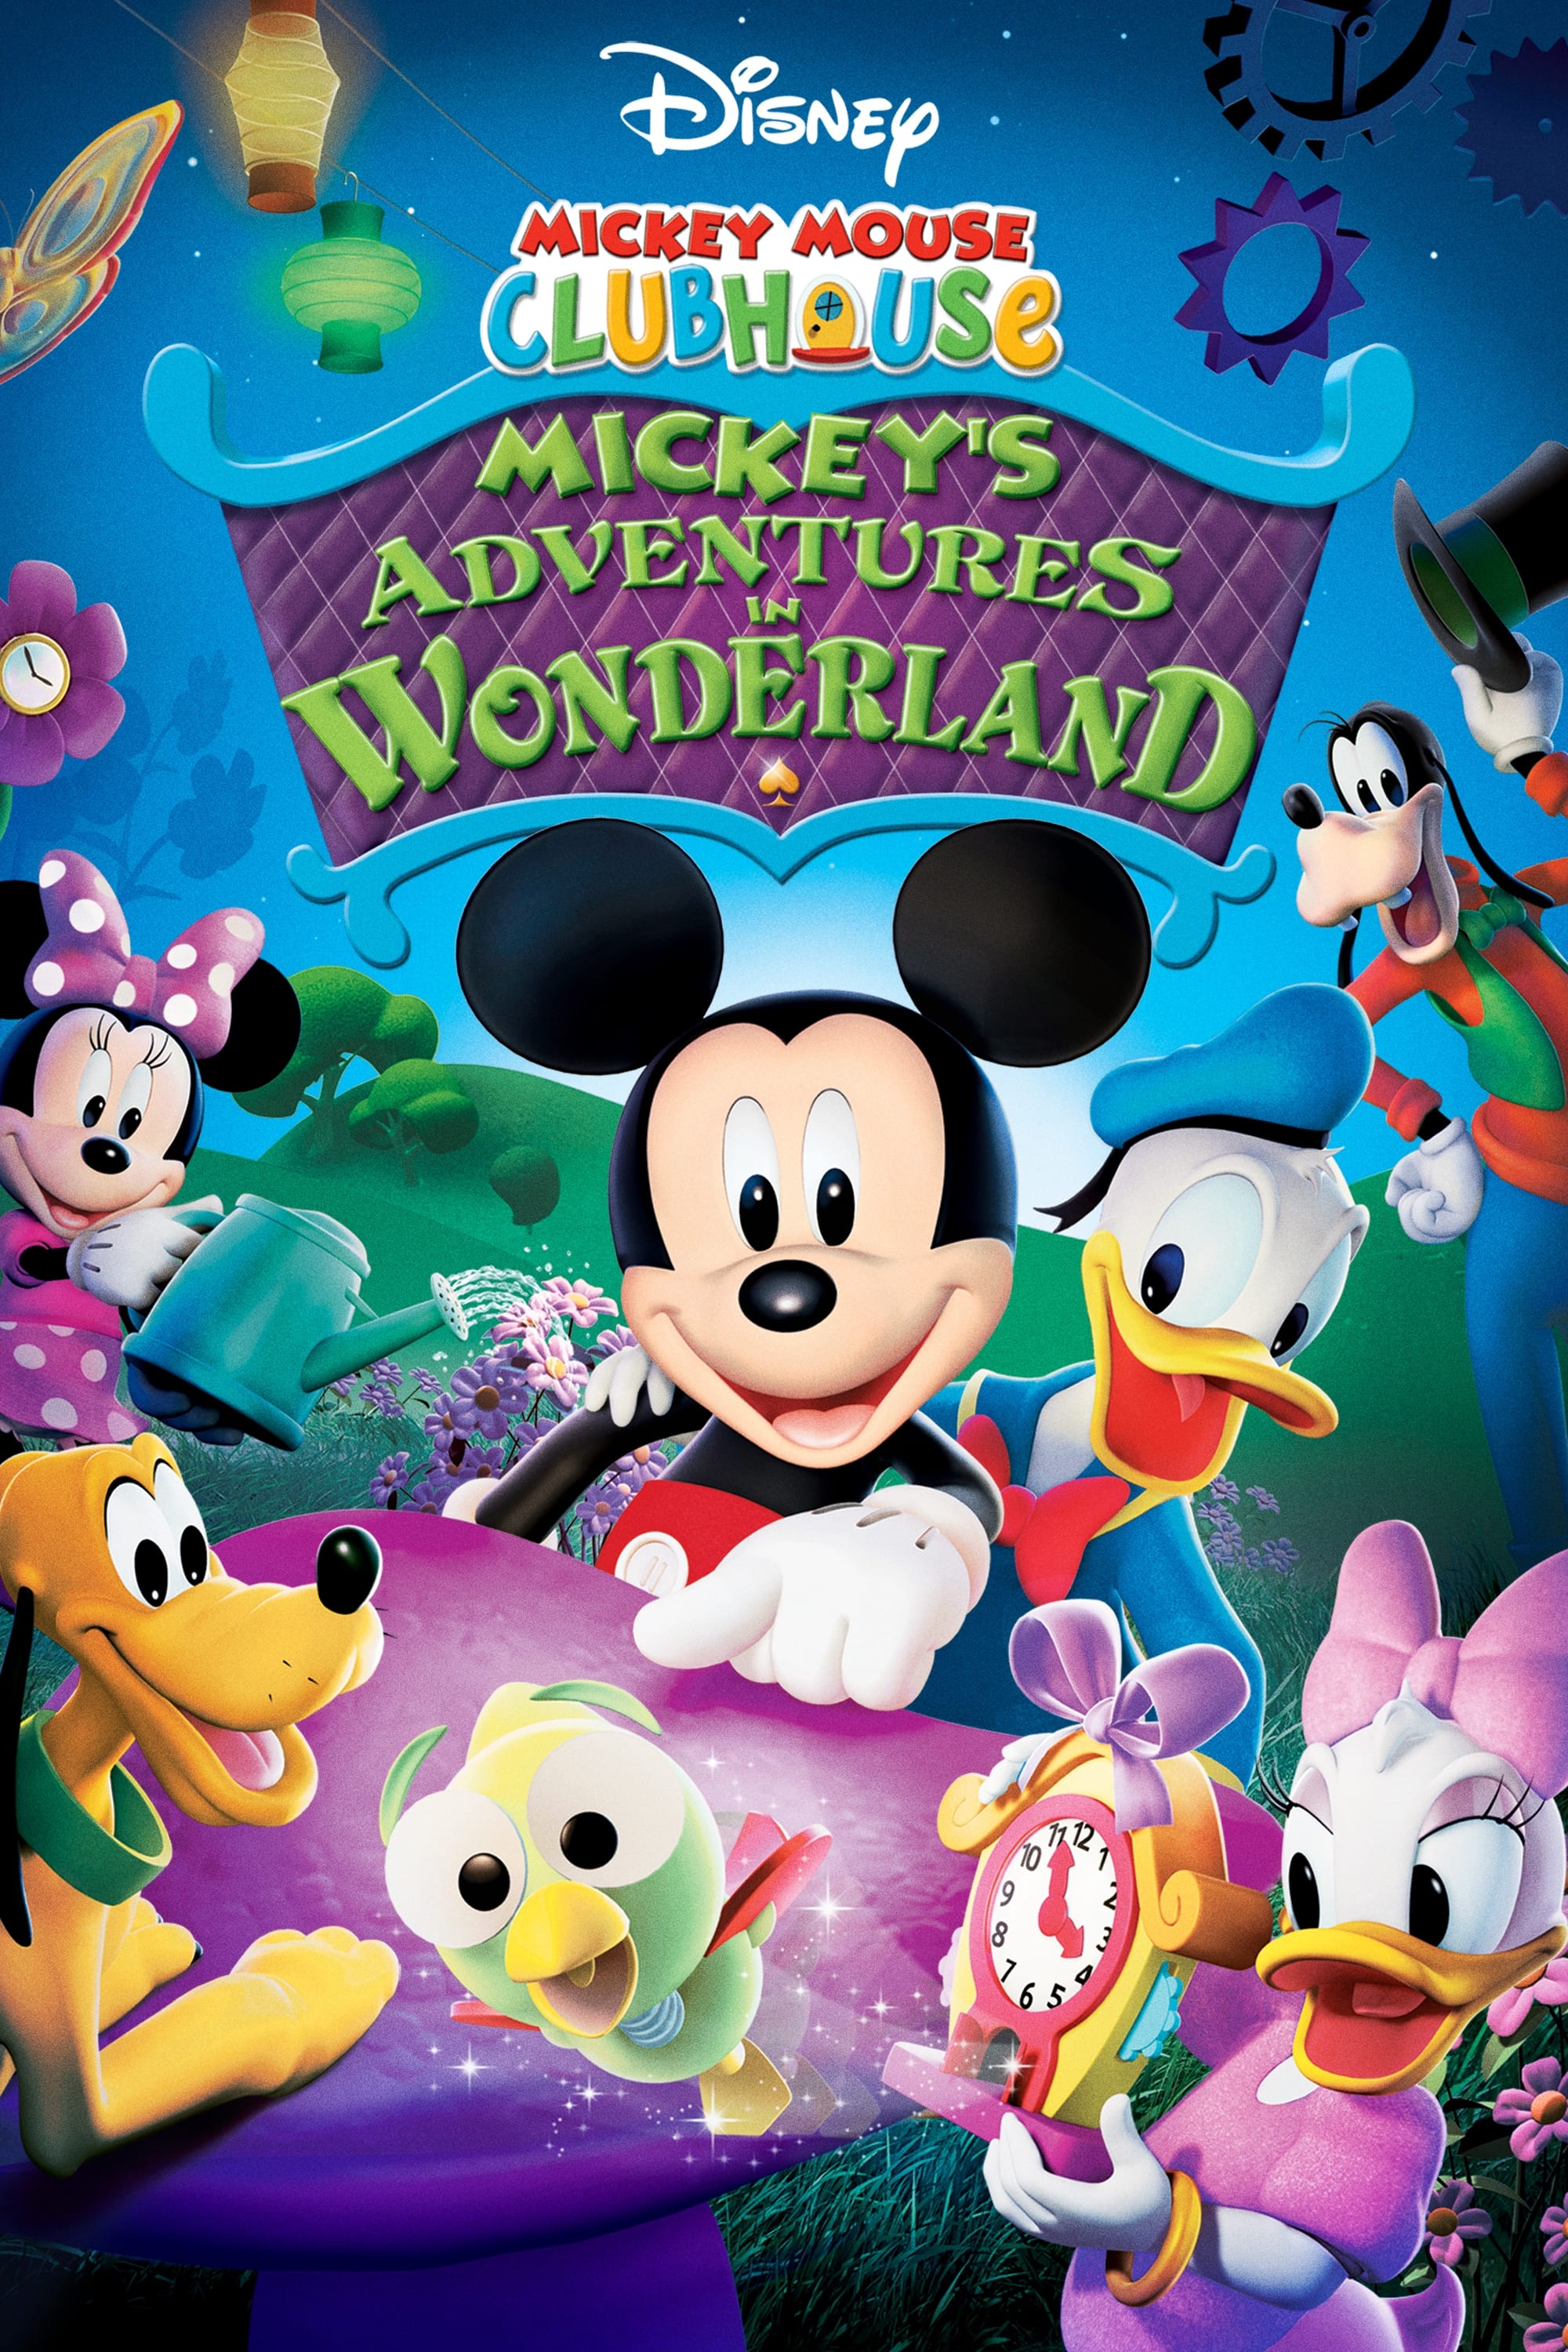 Mickey Mouse Clubhouse: Mickey's Adventures in Wonderland (2009)